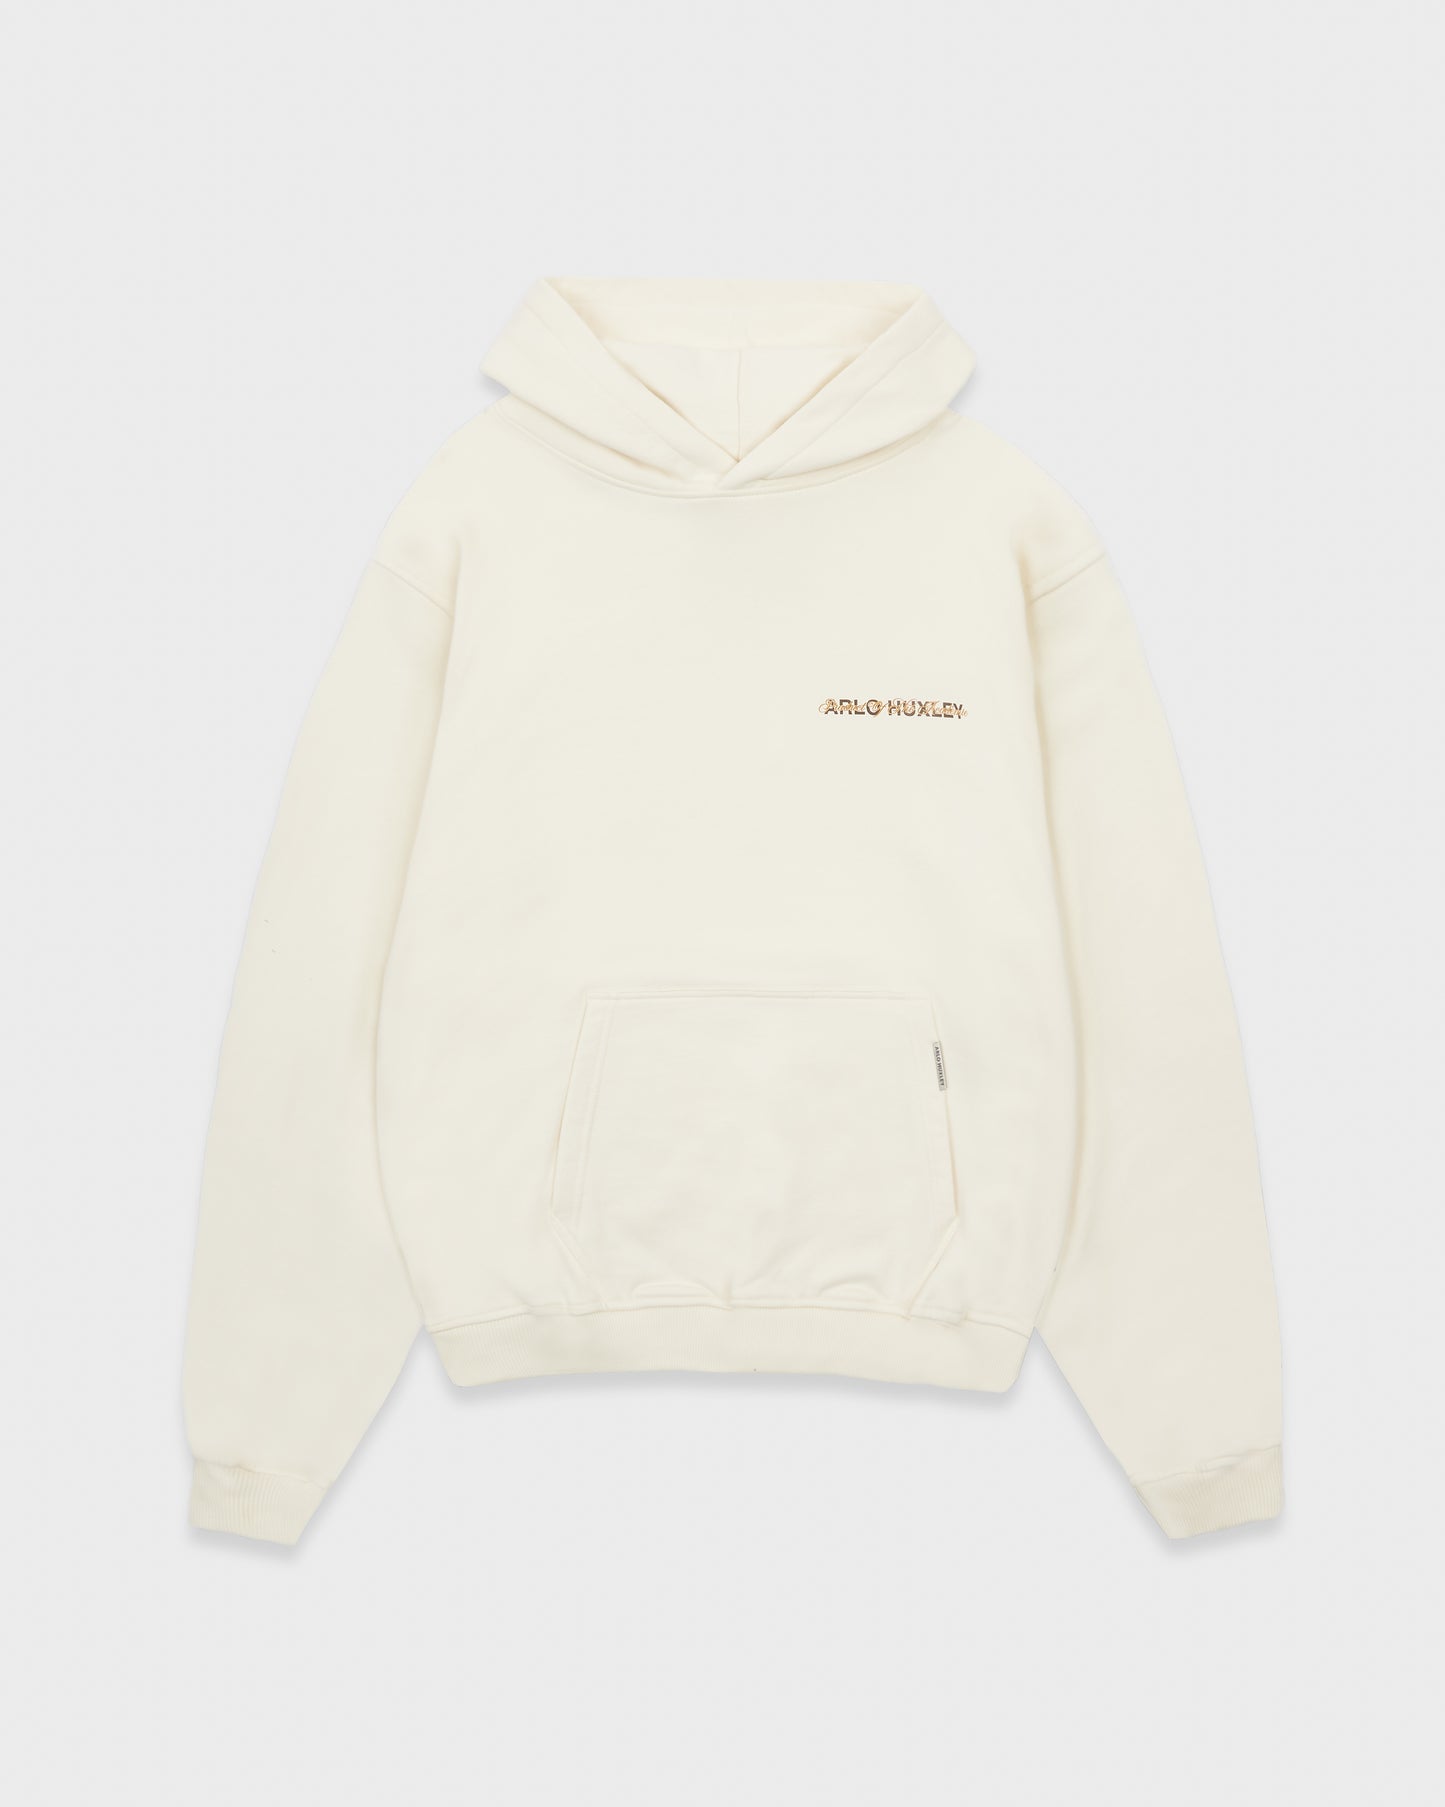 Product Of The Académie Hoodie